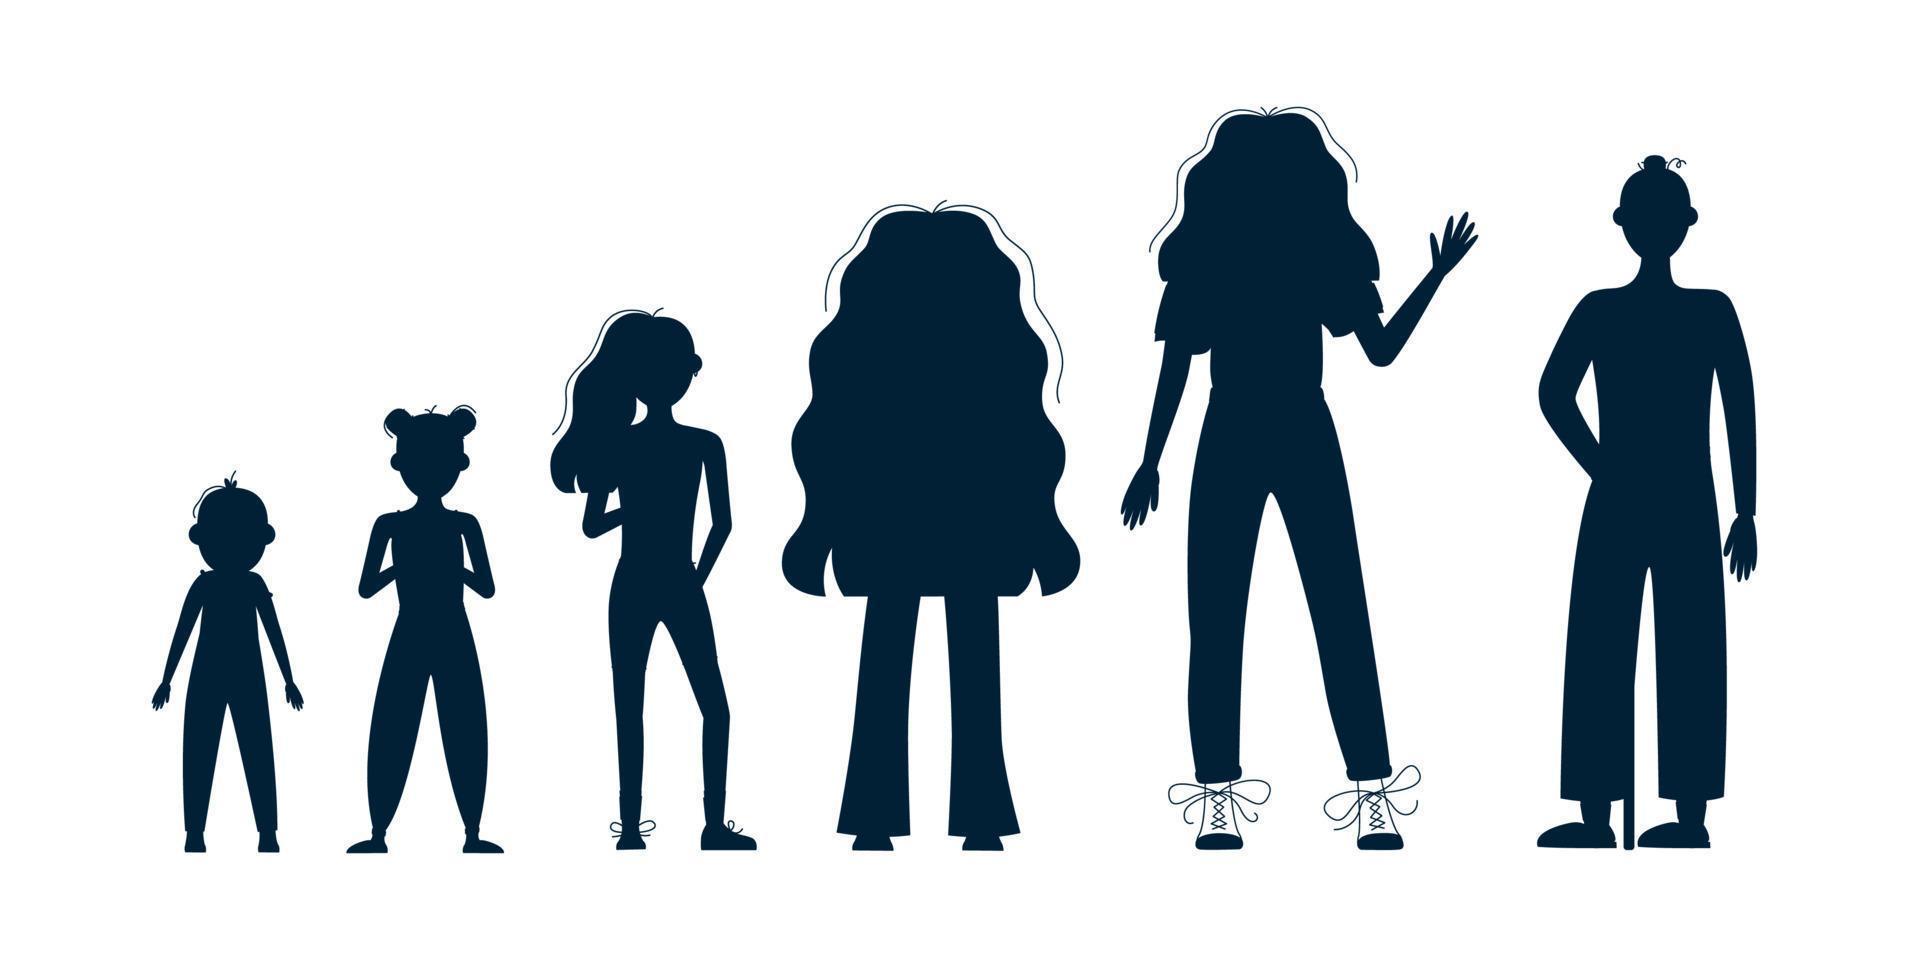 Female character growth stages, aging process vector silhouette set. Baby, teenager, adult and elderly person development.